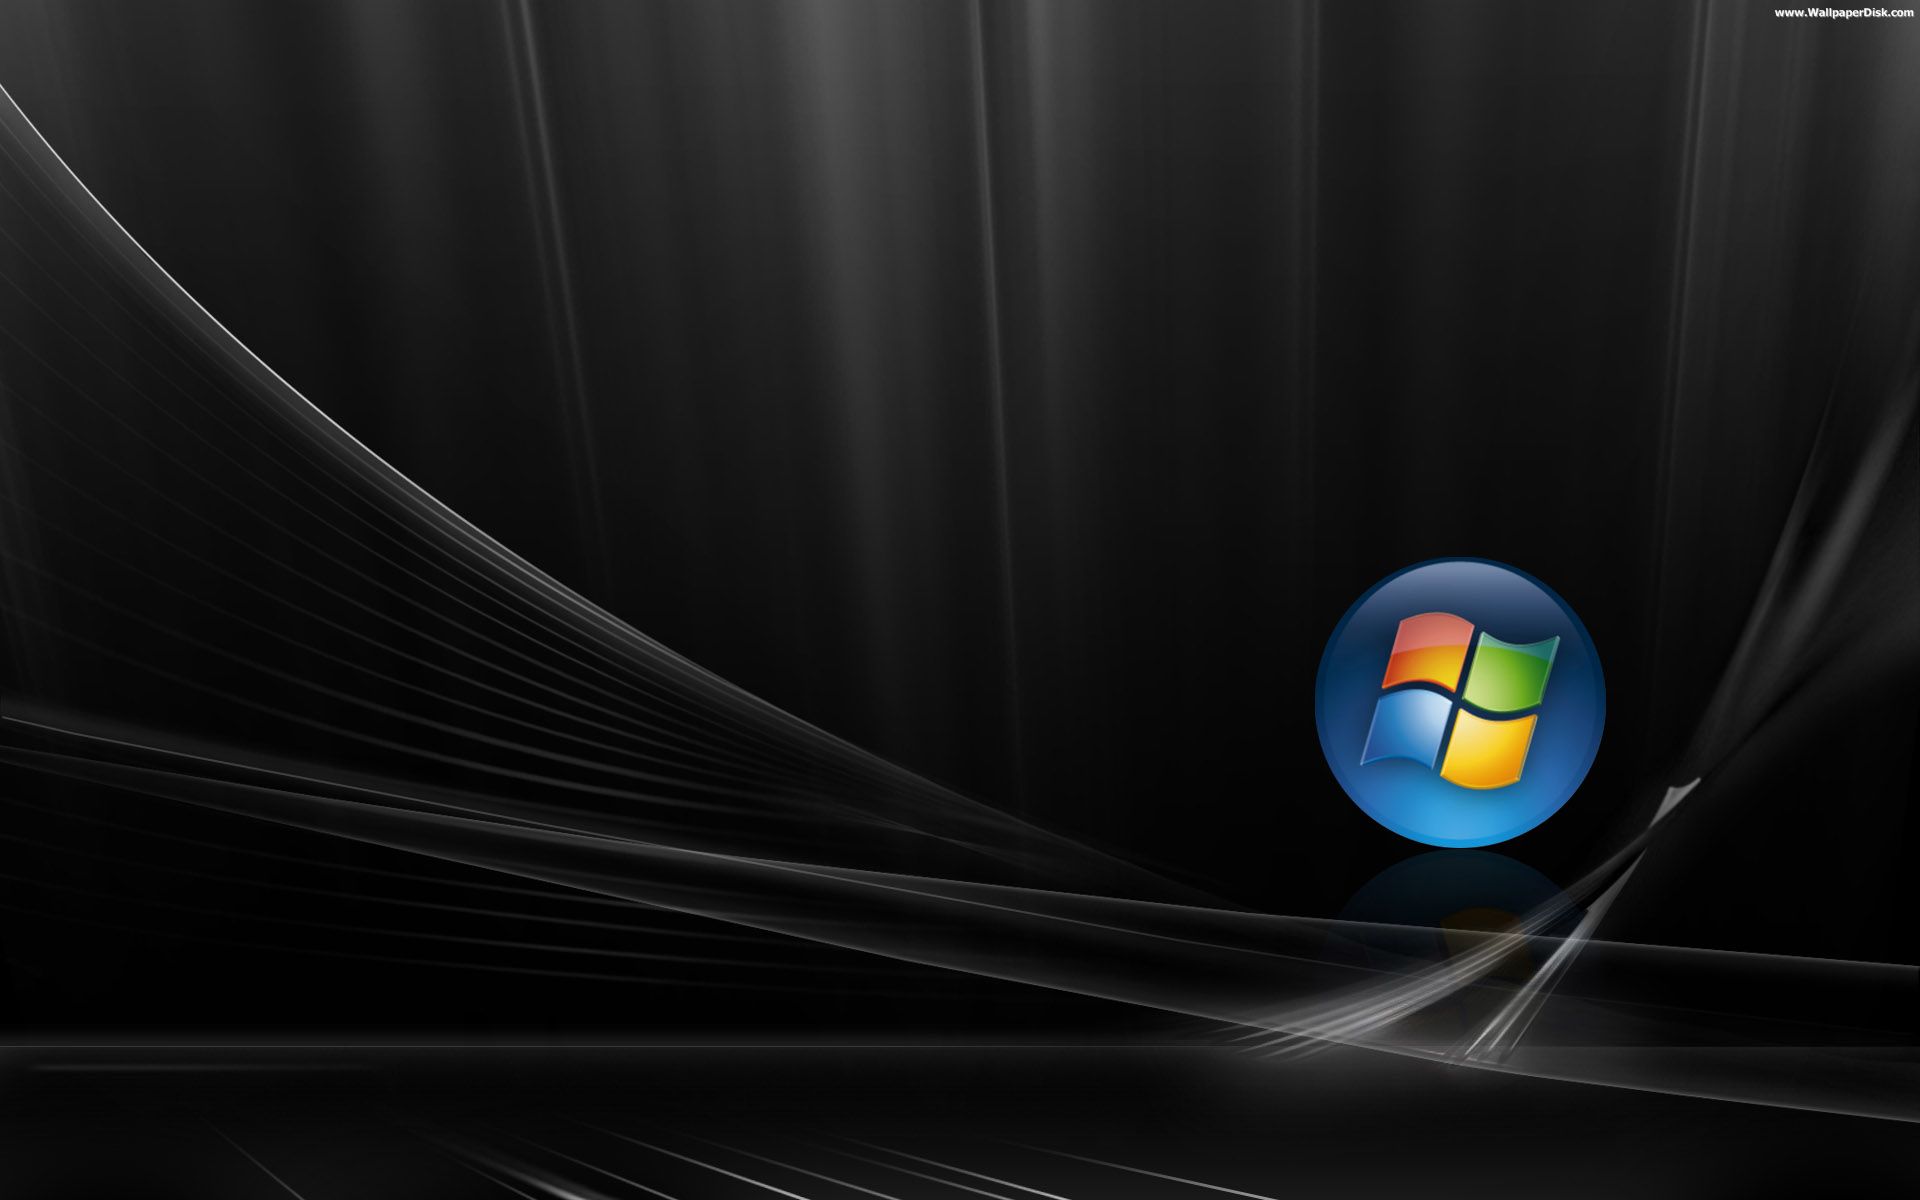 Wallpaper Windowsace Windows Black Wall Ware And Operating System